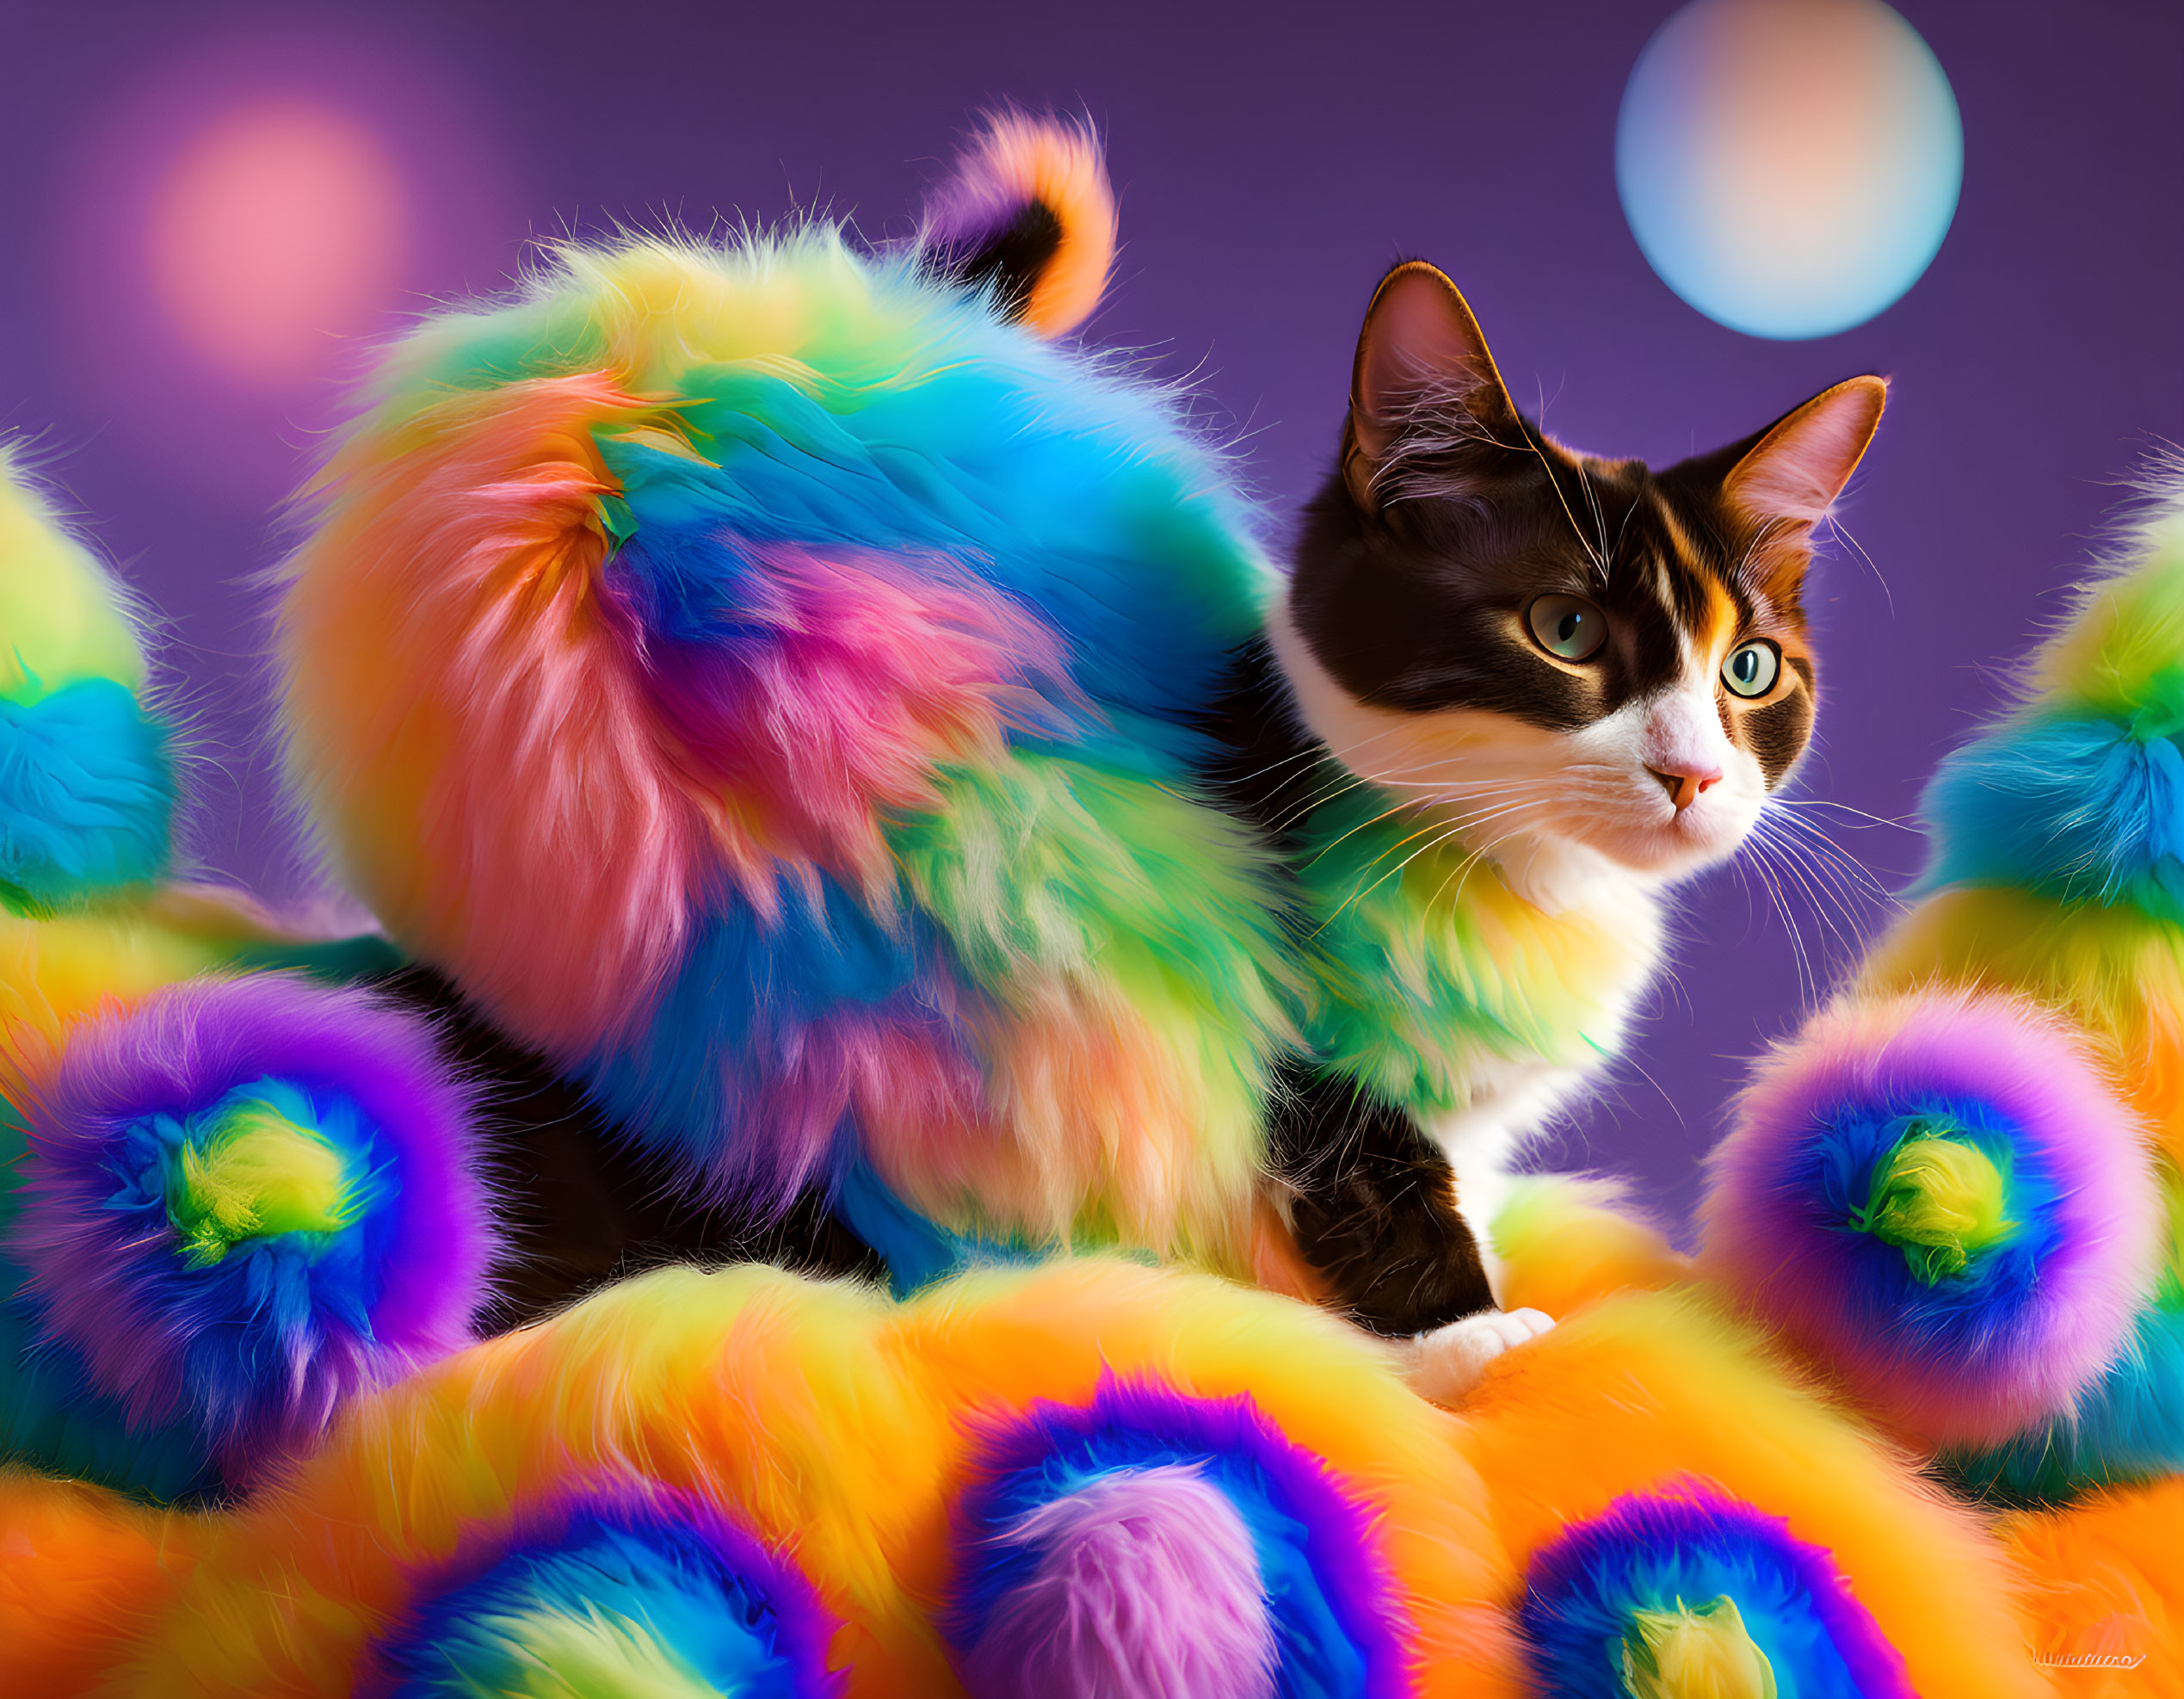 Colorful Cat in Furry Coat with Fluffy Balls on Purple Background